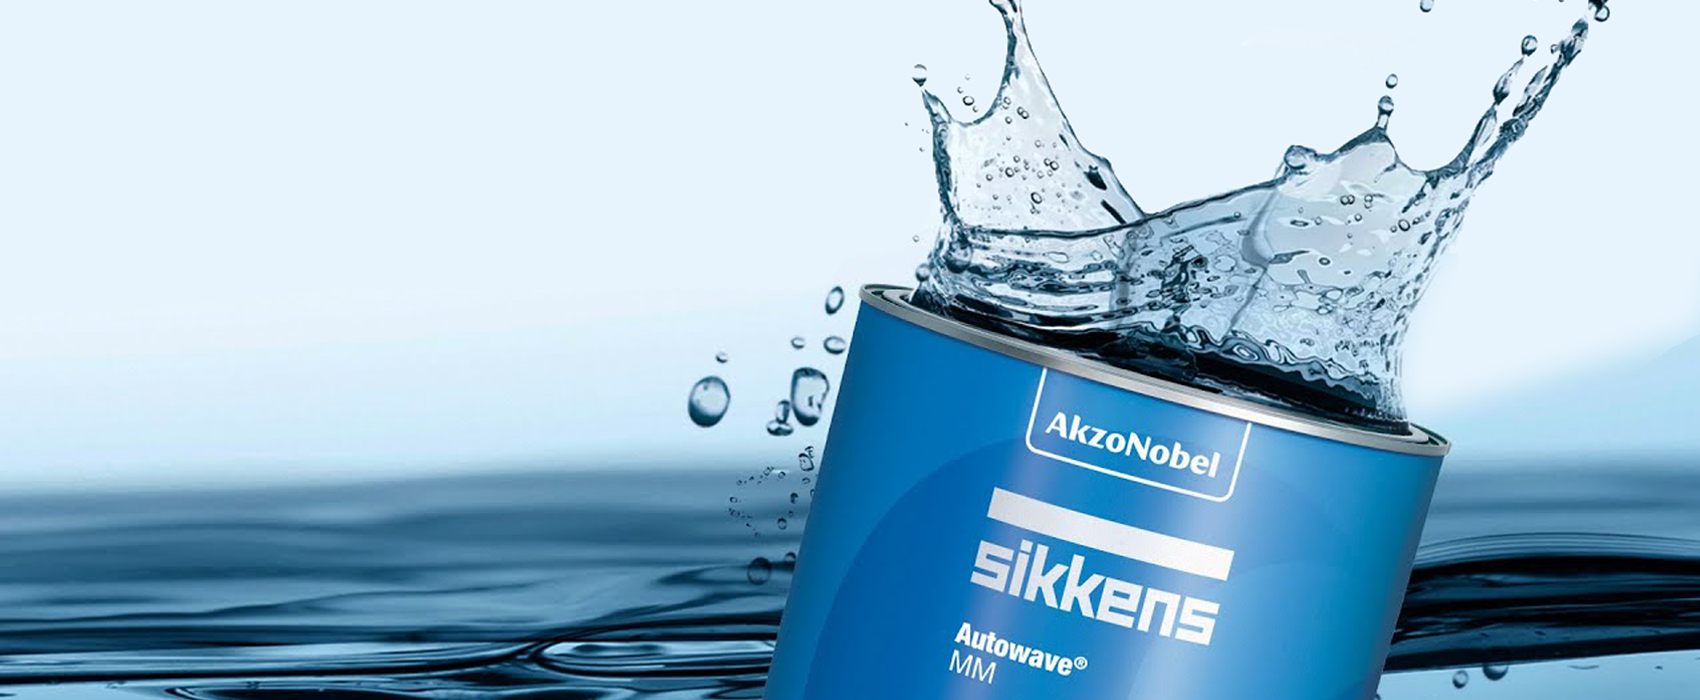 Productos Sikkens